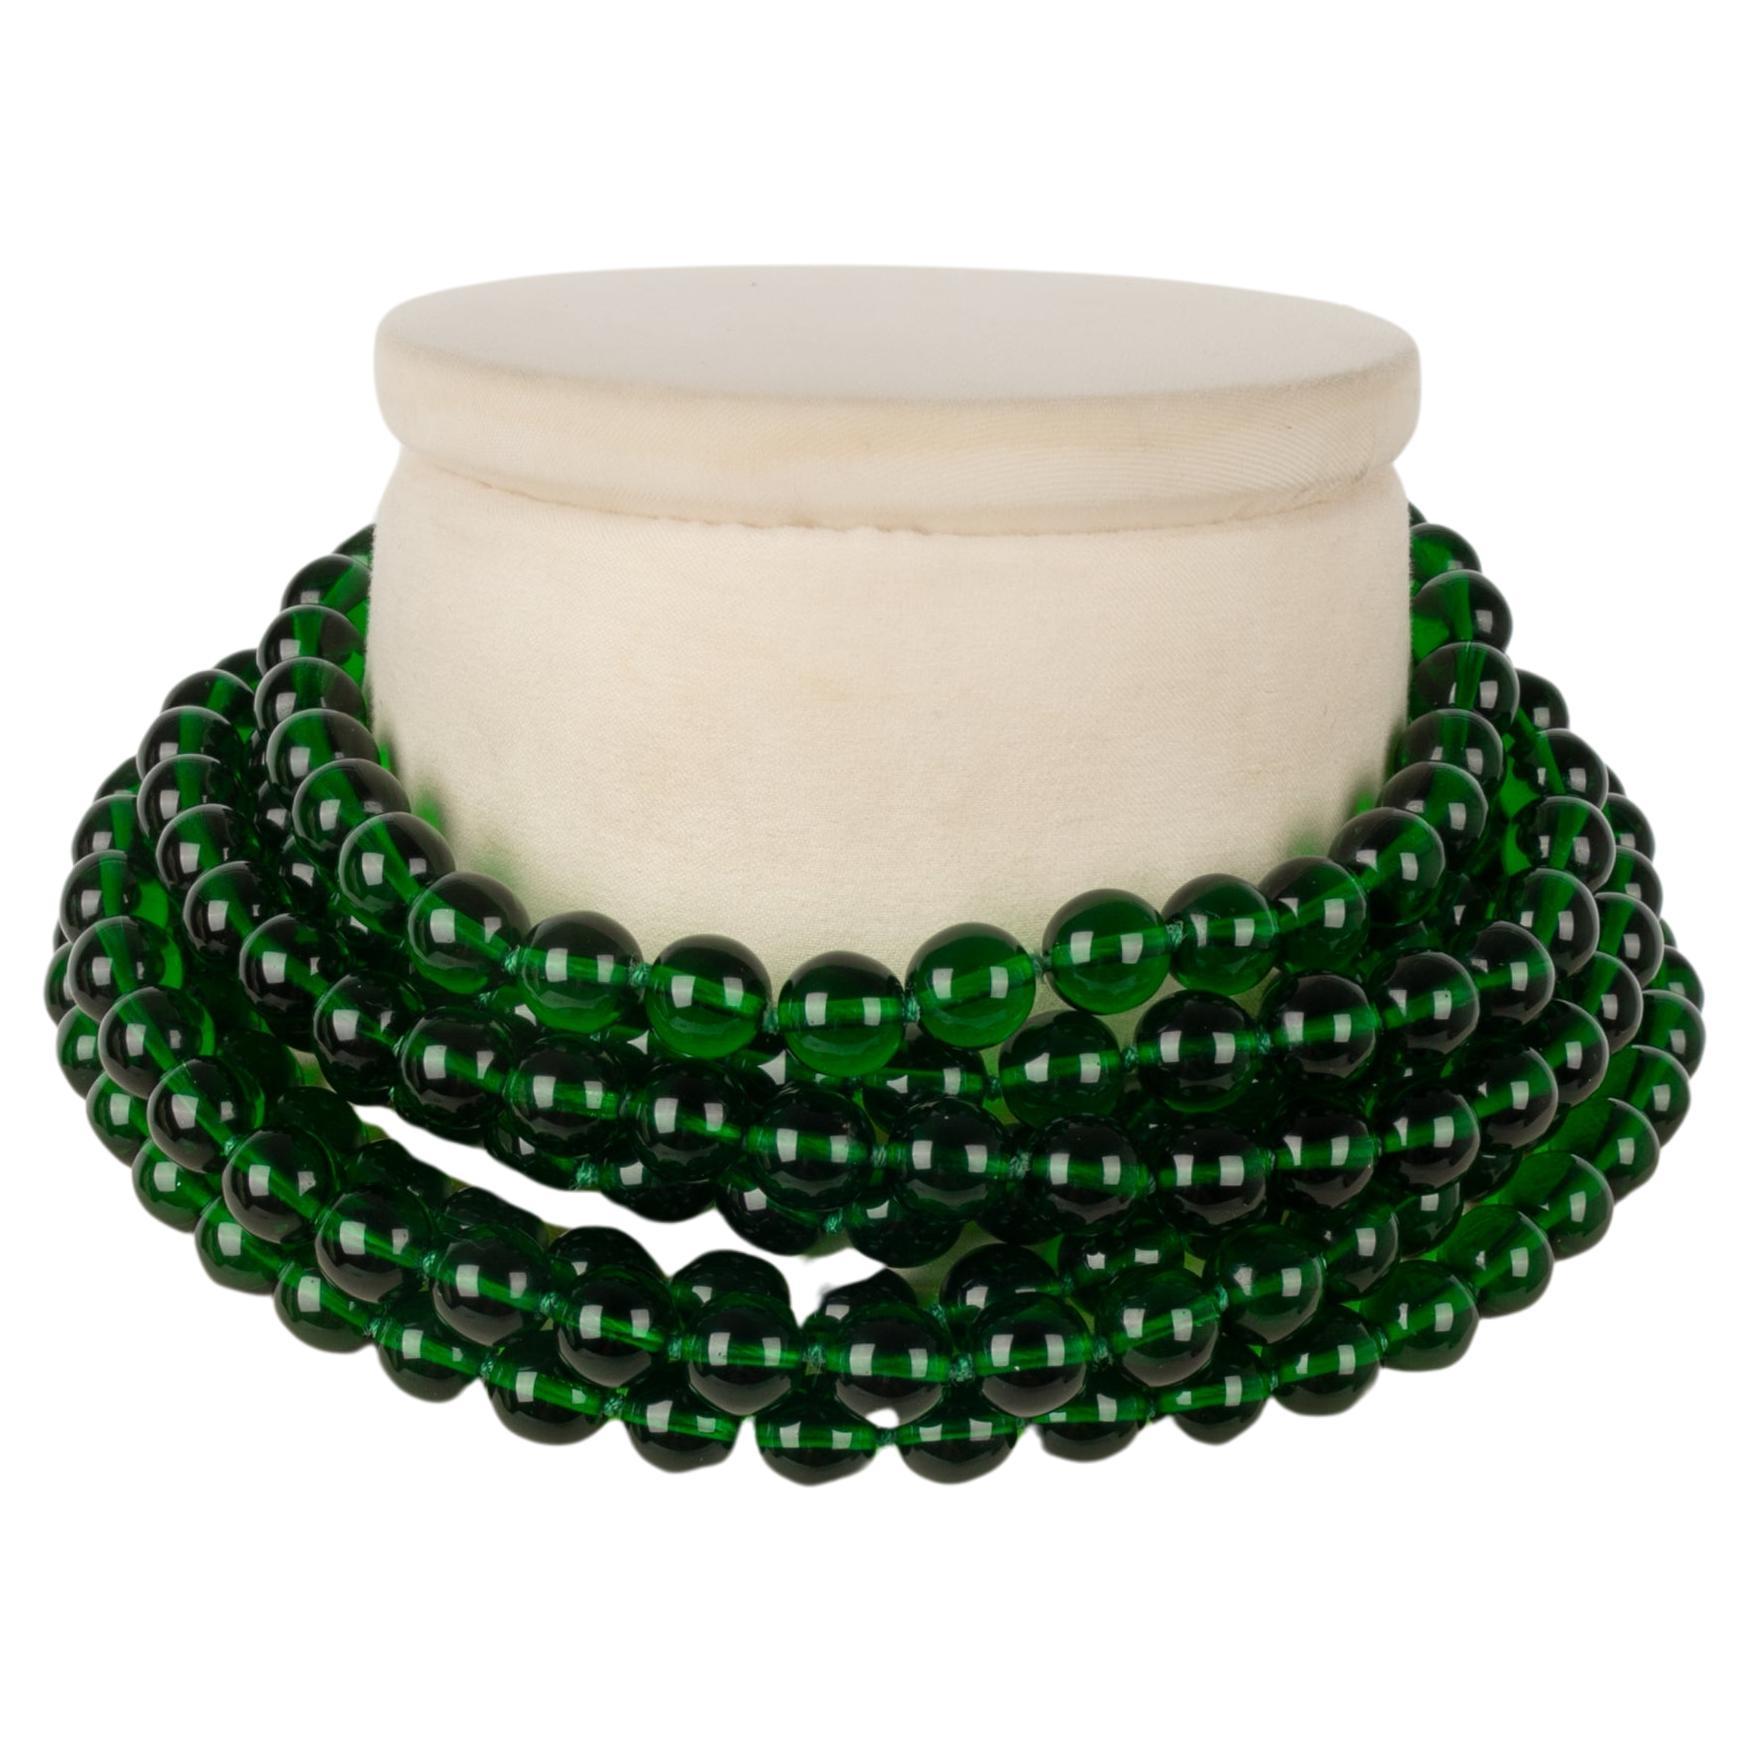 Chanel Short Necklace Made Up of Several Rows of Green Glass Beads, 1980s For Sale